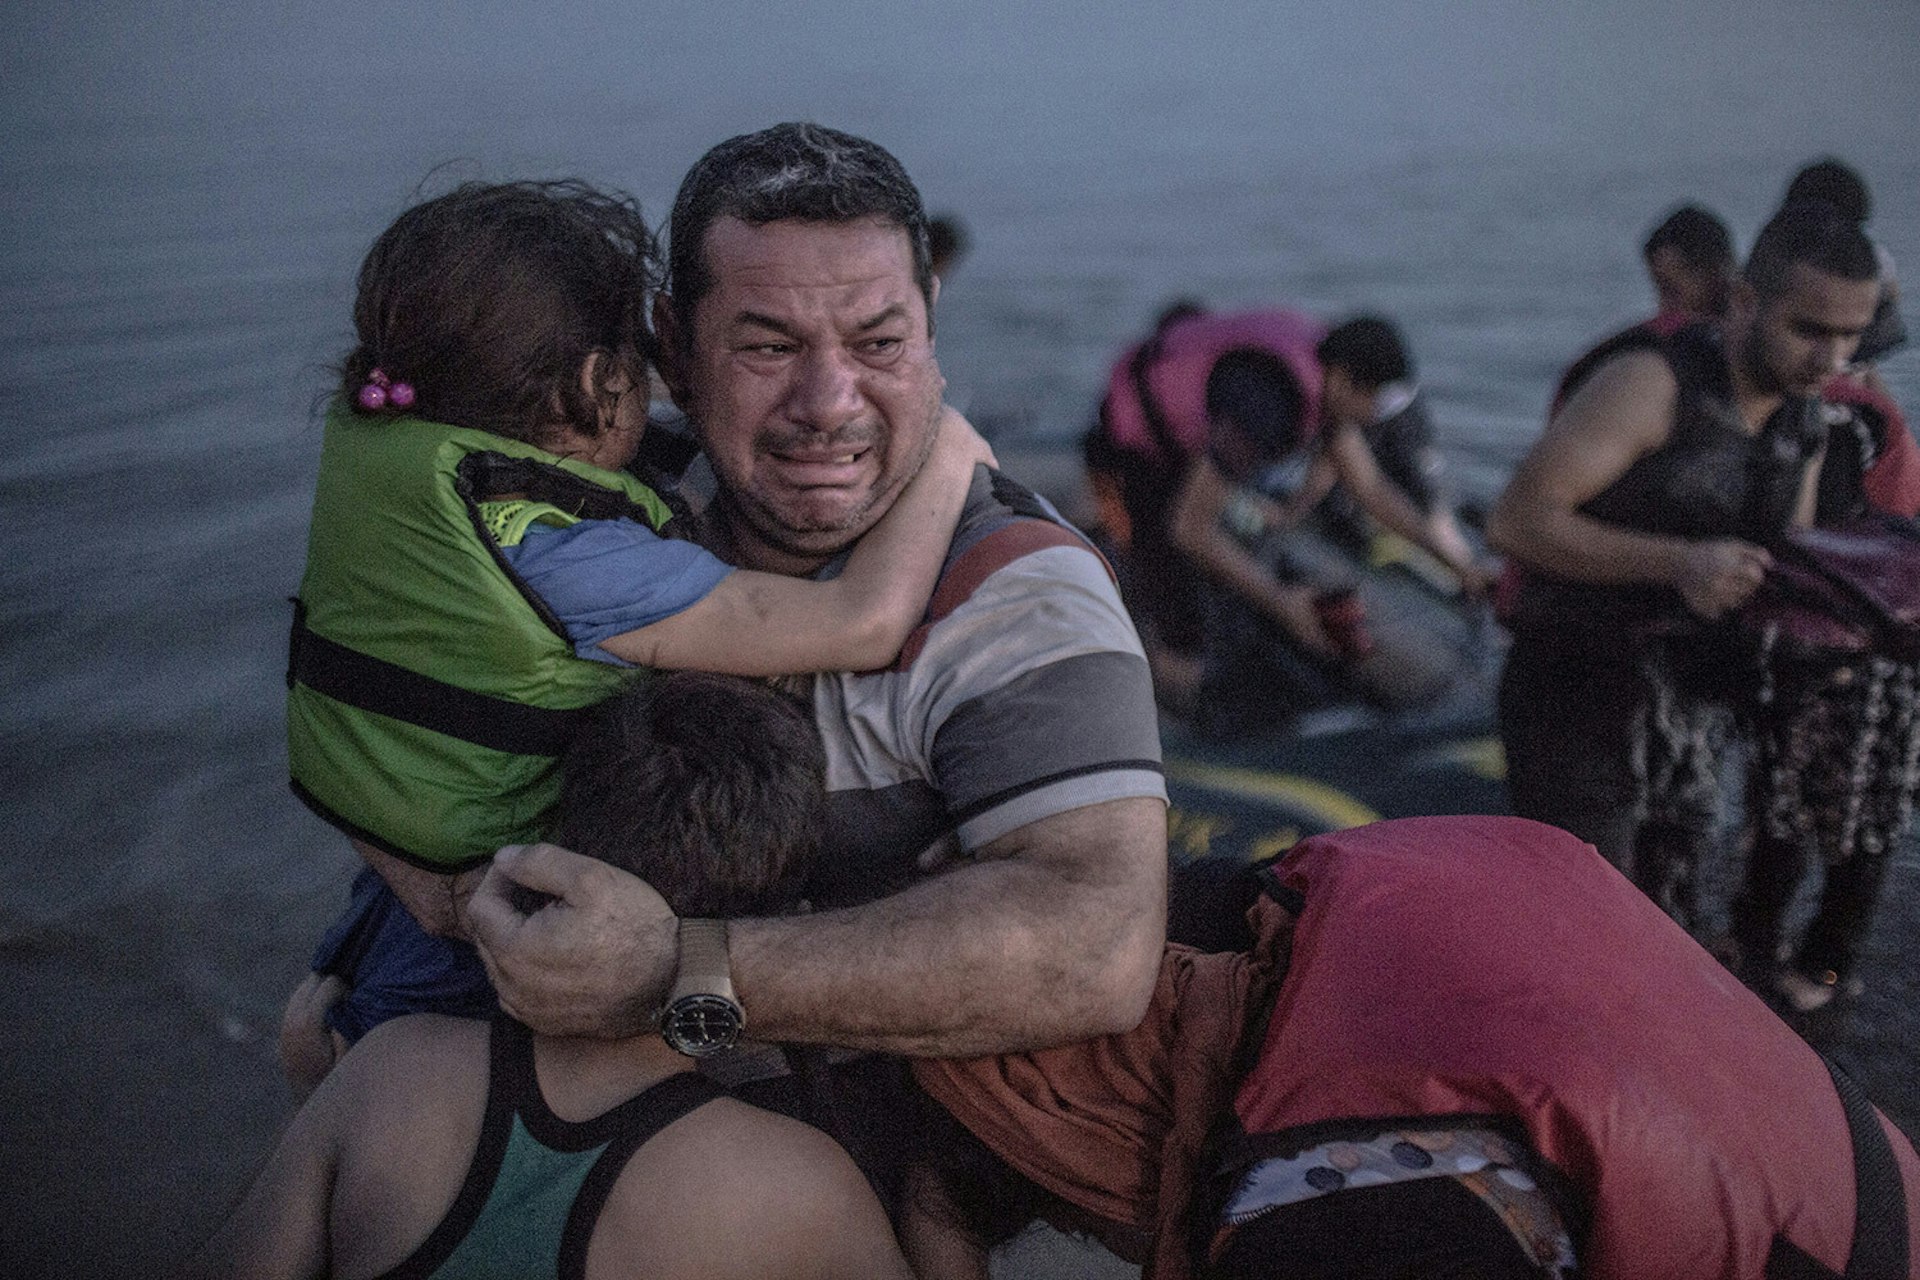 Governments fail to help refugees so people take matters into their own hands